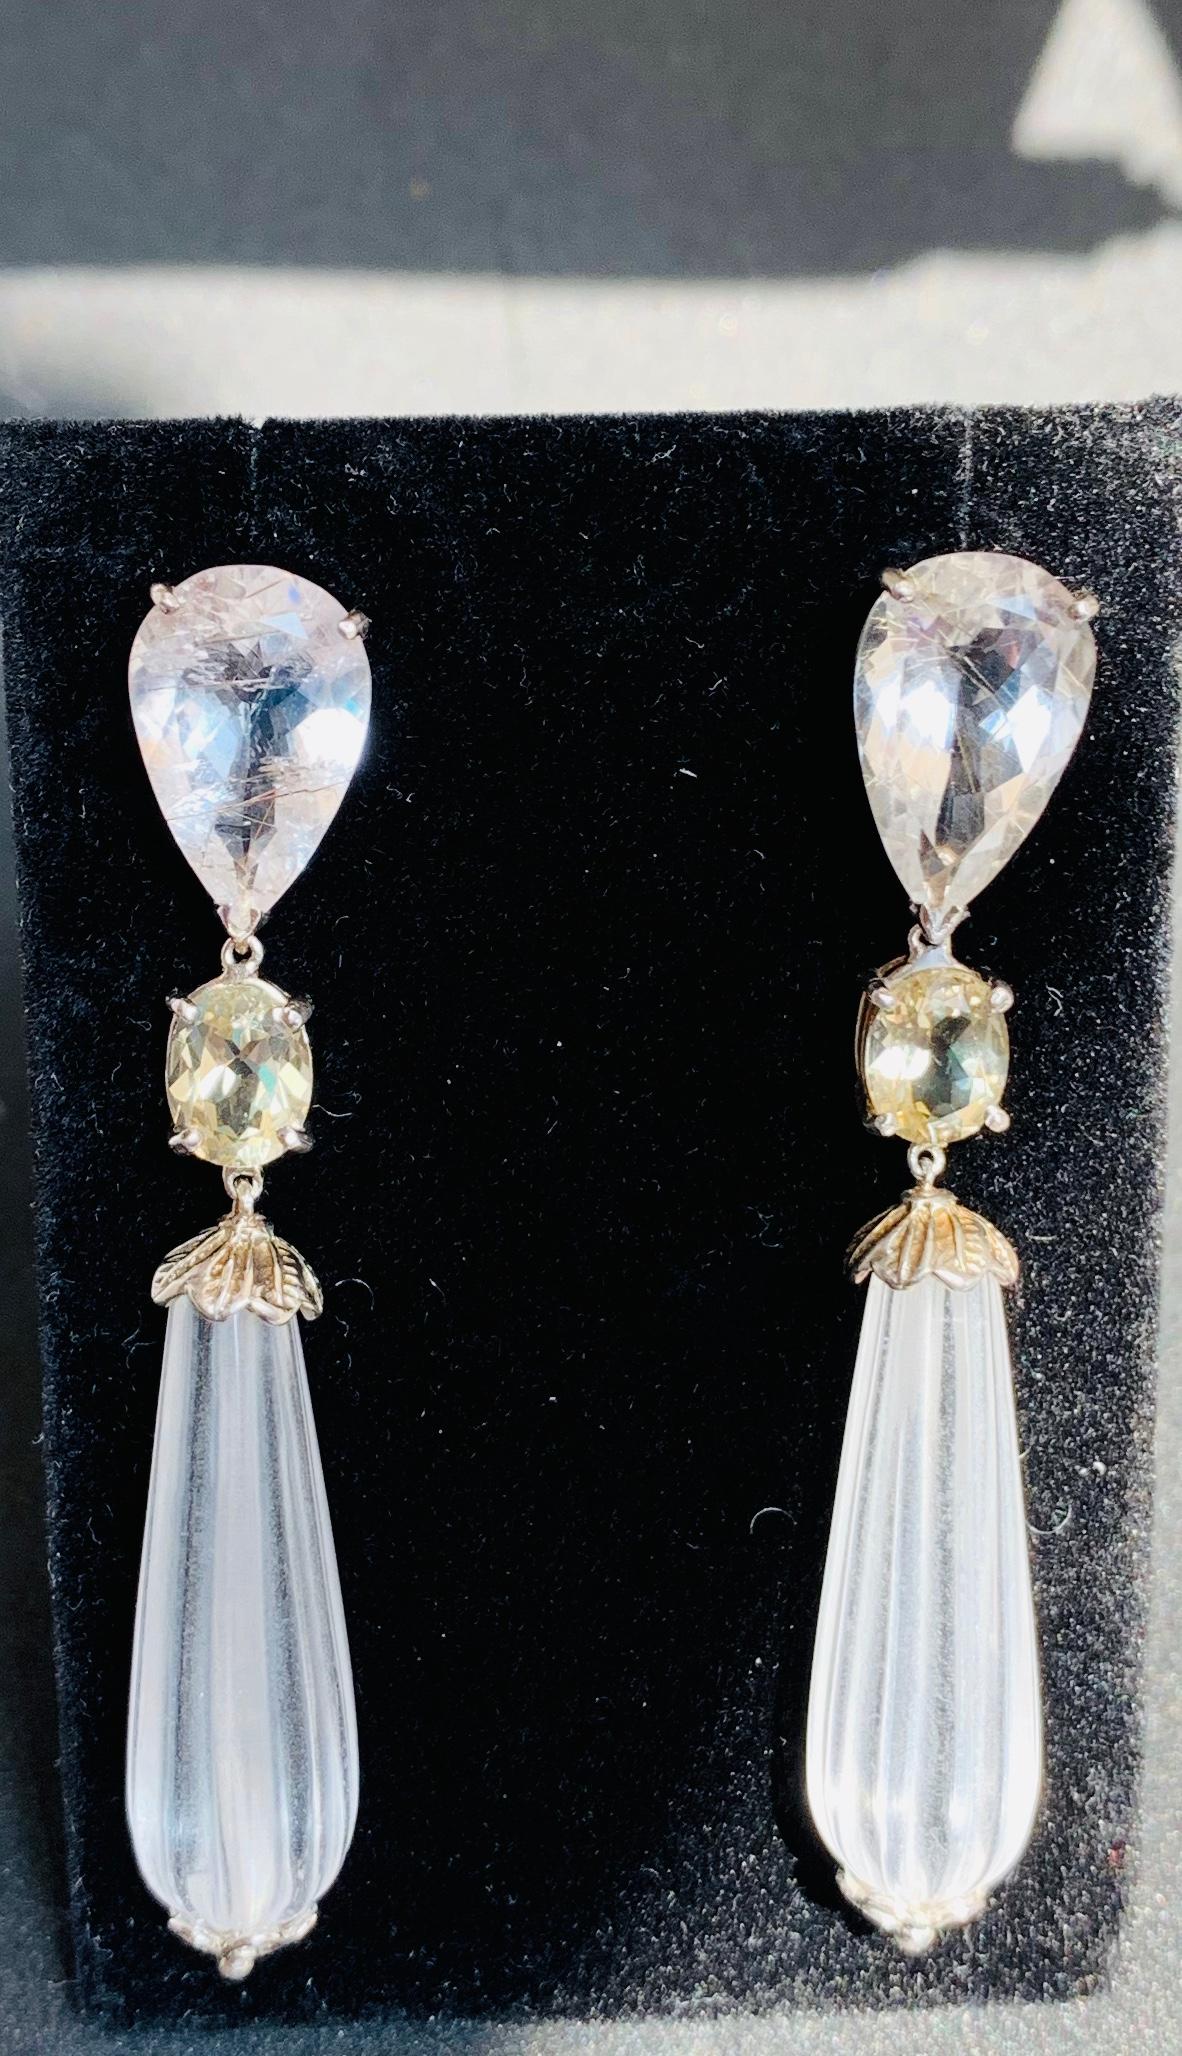 Sabrina Balsky Jewelry
Handmade  Sparkling Rutile Quartz Pear shaped Drop Earrings with Andesine Labradorite centre detail and Rock Crystal drops set in Sterling details with Rhodium Plating.  Earrings are 2-7/8